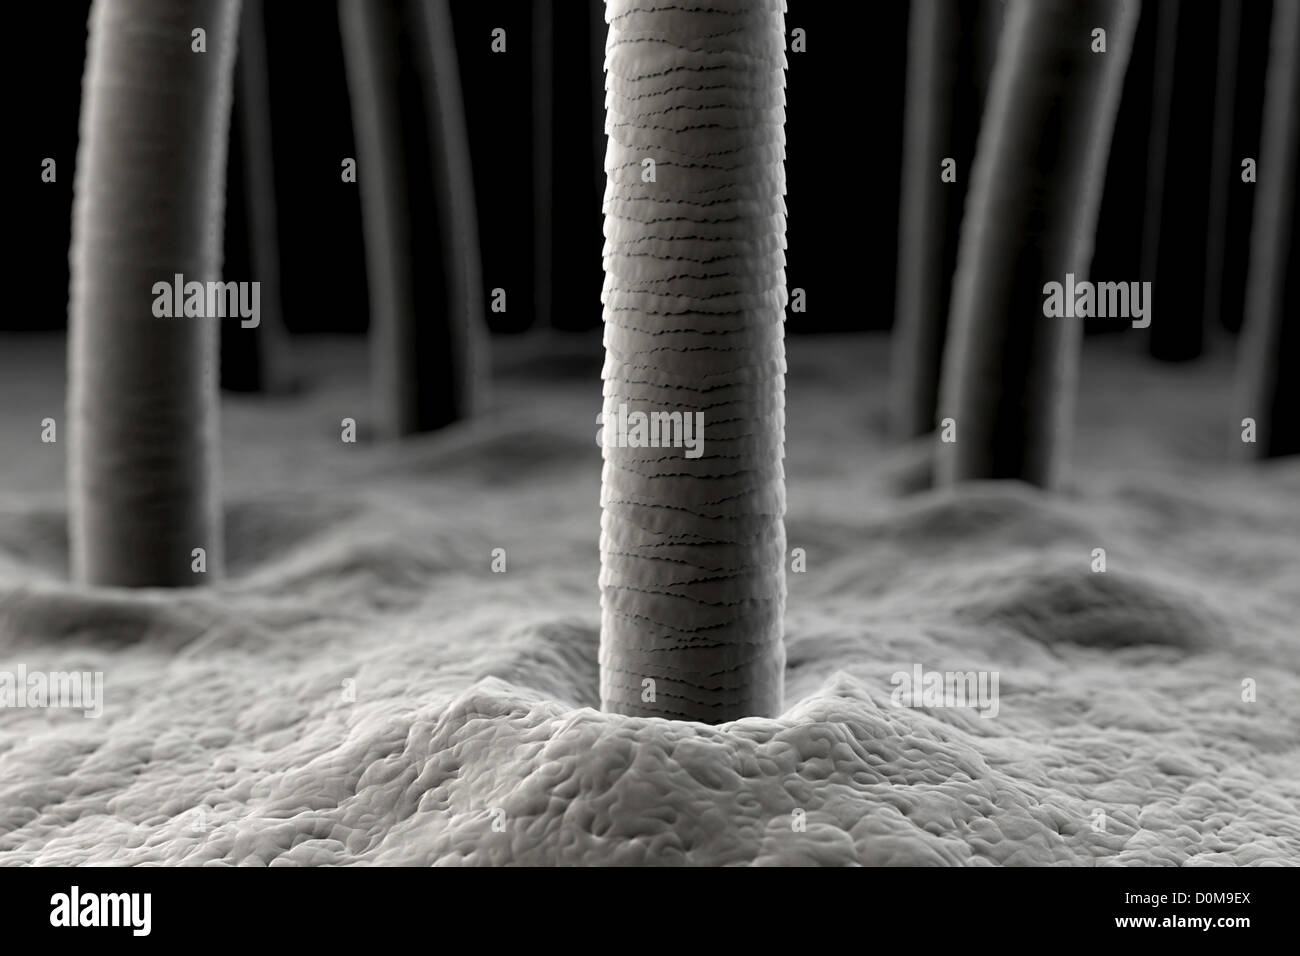 Fascinating Images of Everyday Objects Under a Microscope  Readers Digest